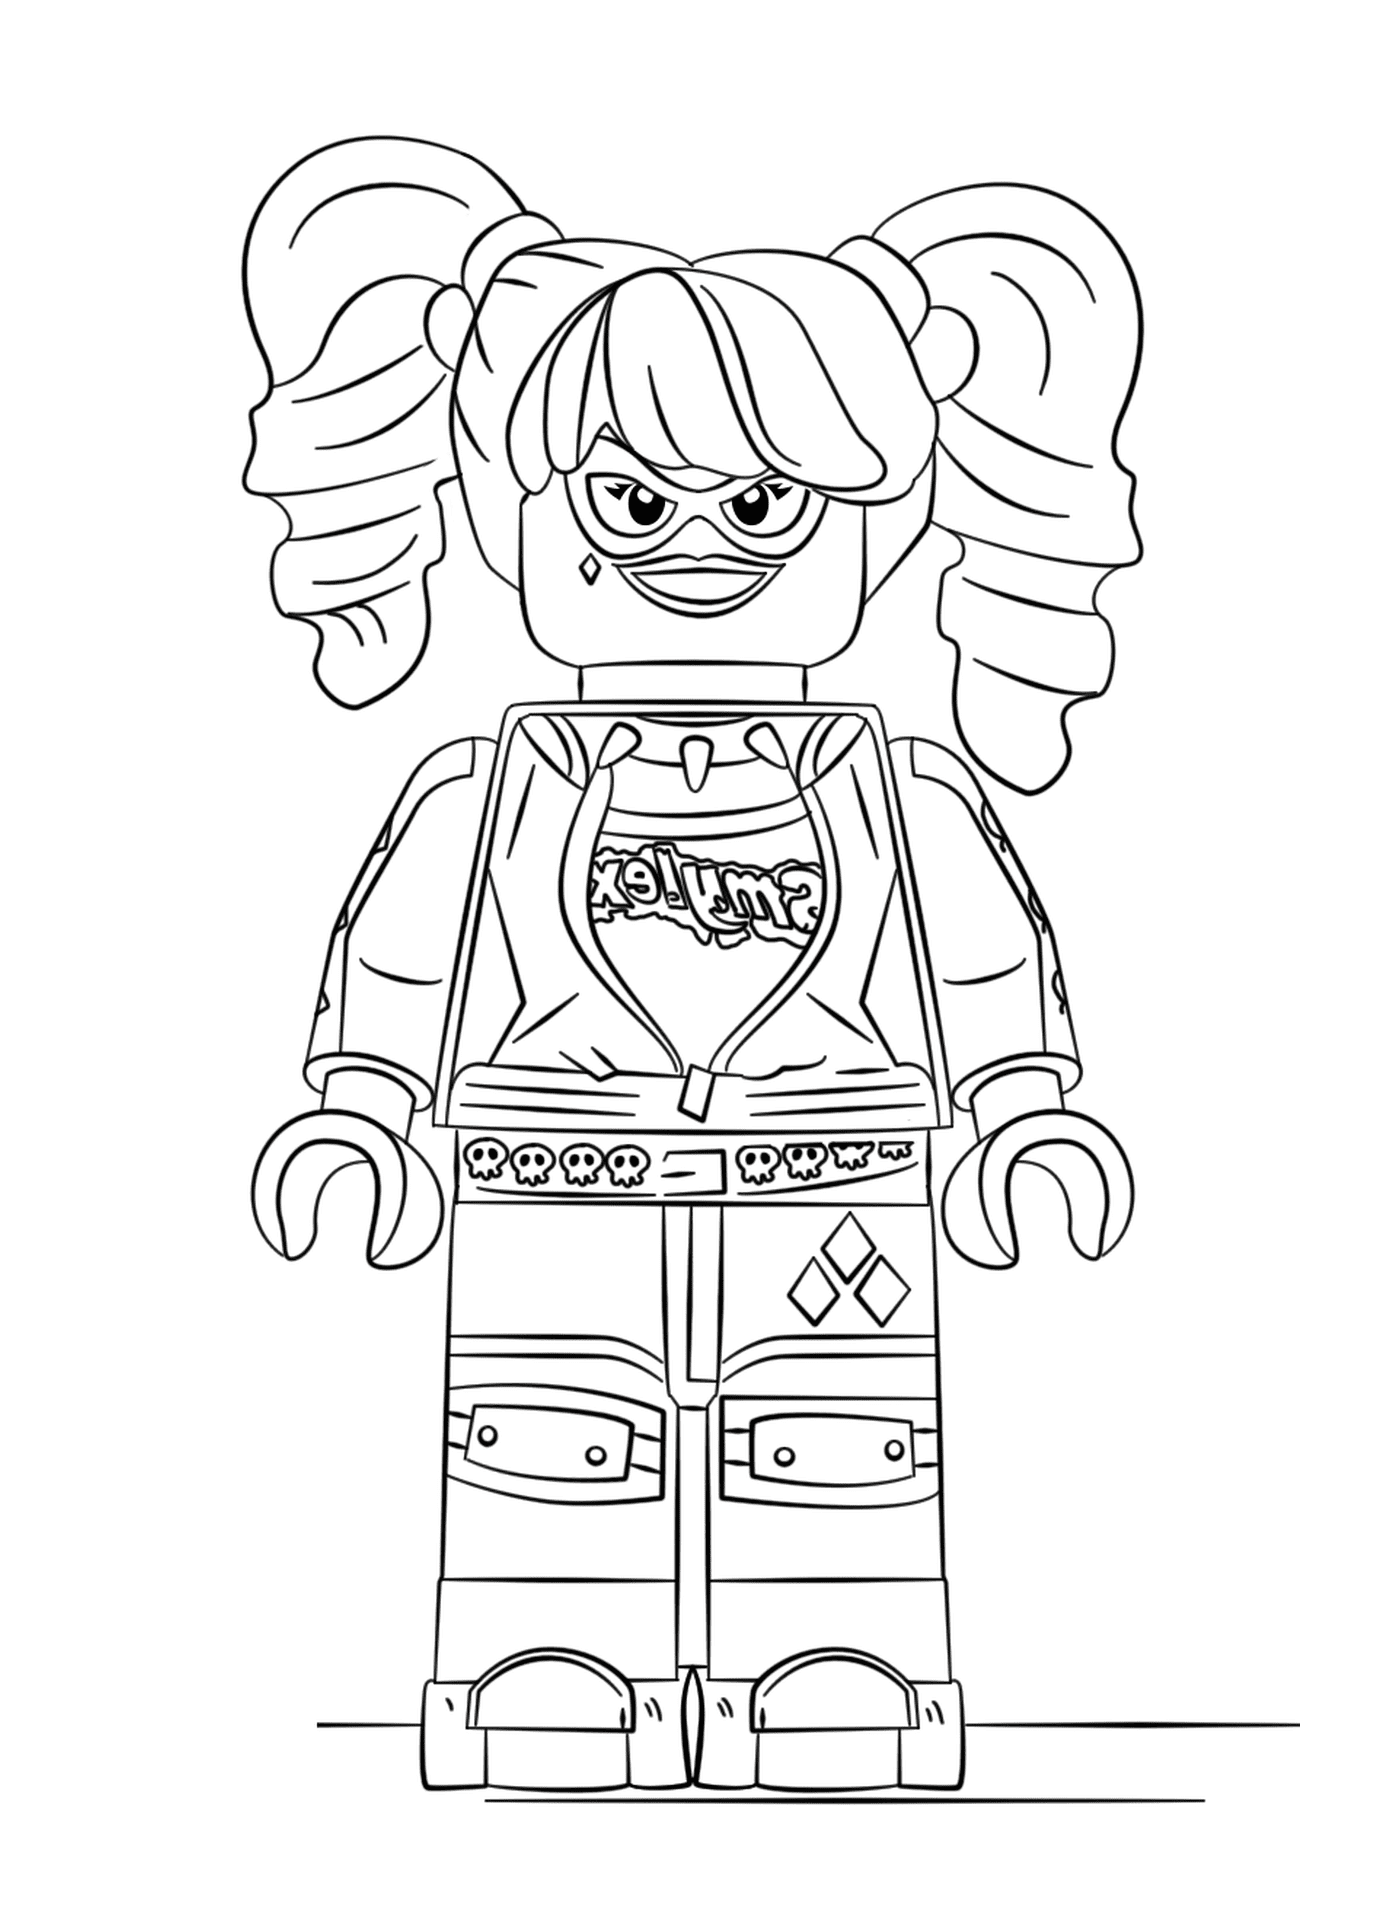  Lego girl with a smile on her face 